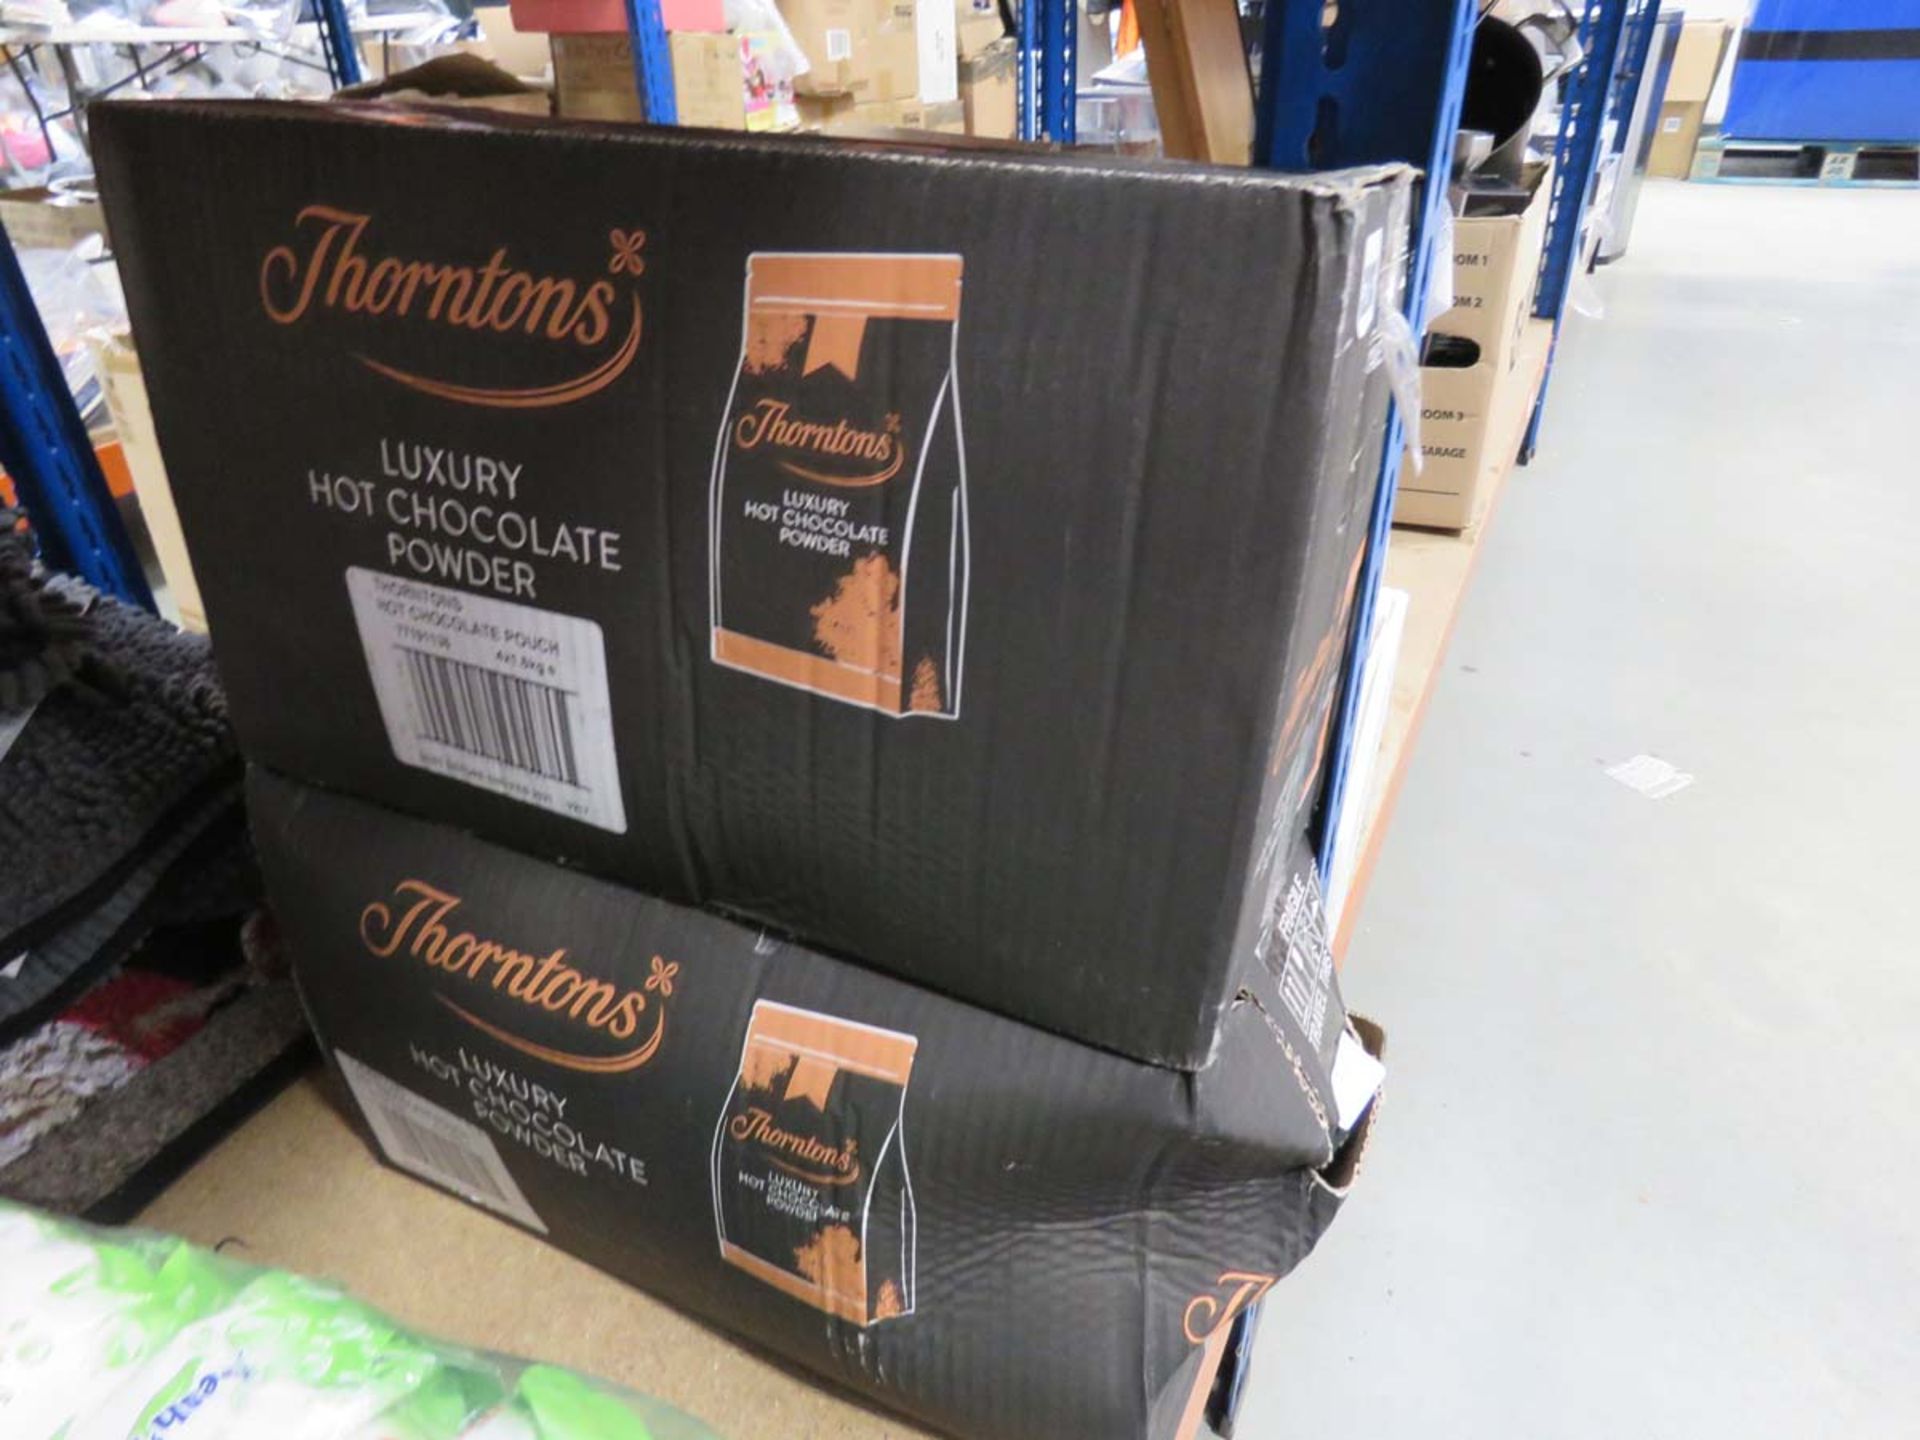 2 boxes of Thorntons hot chocolate powder